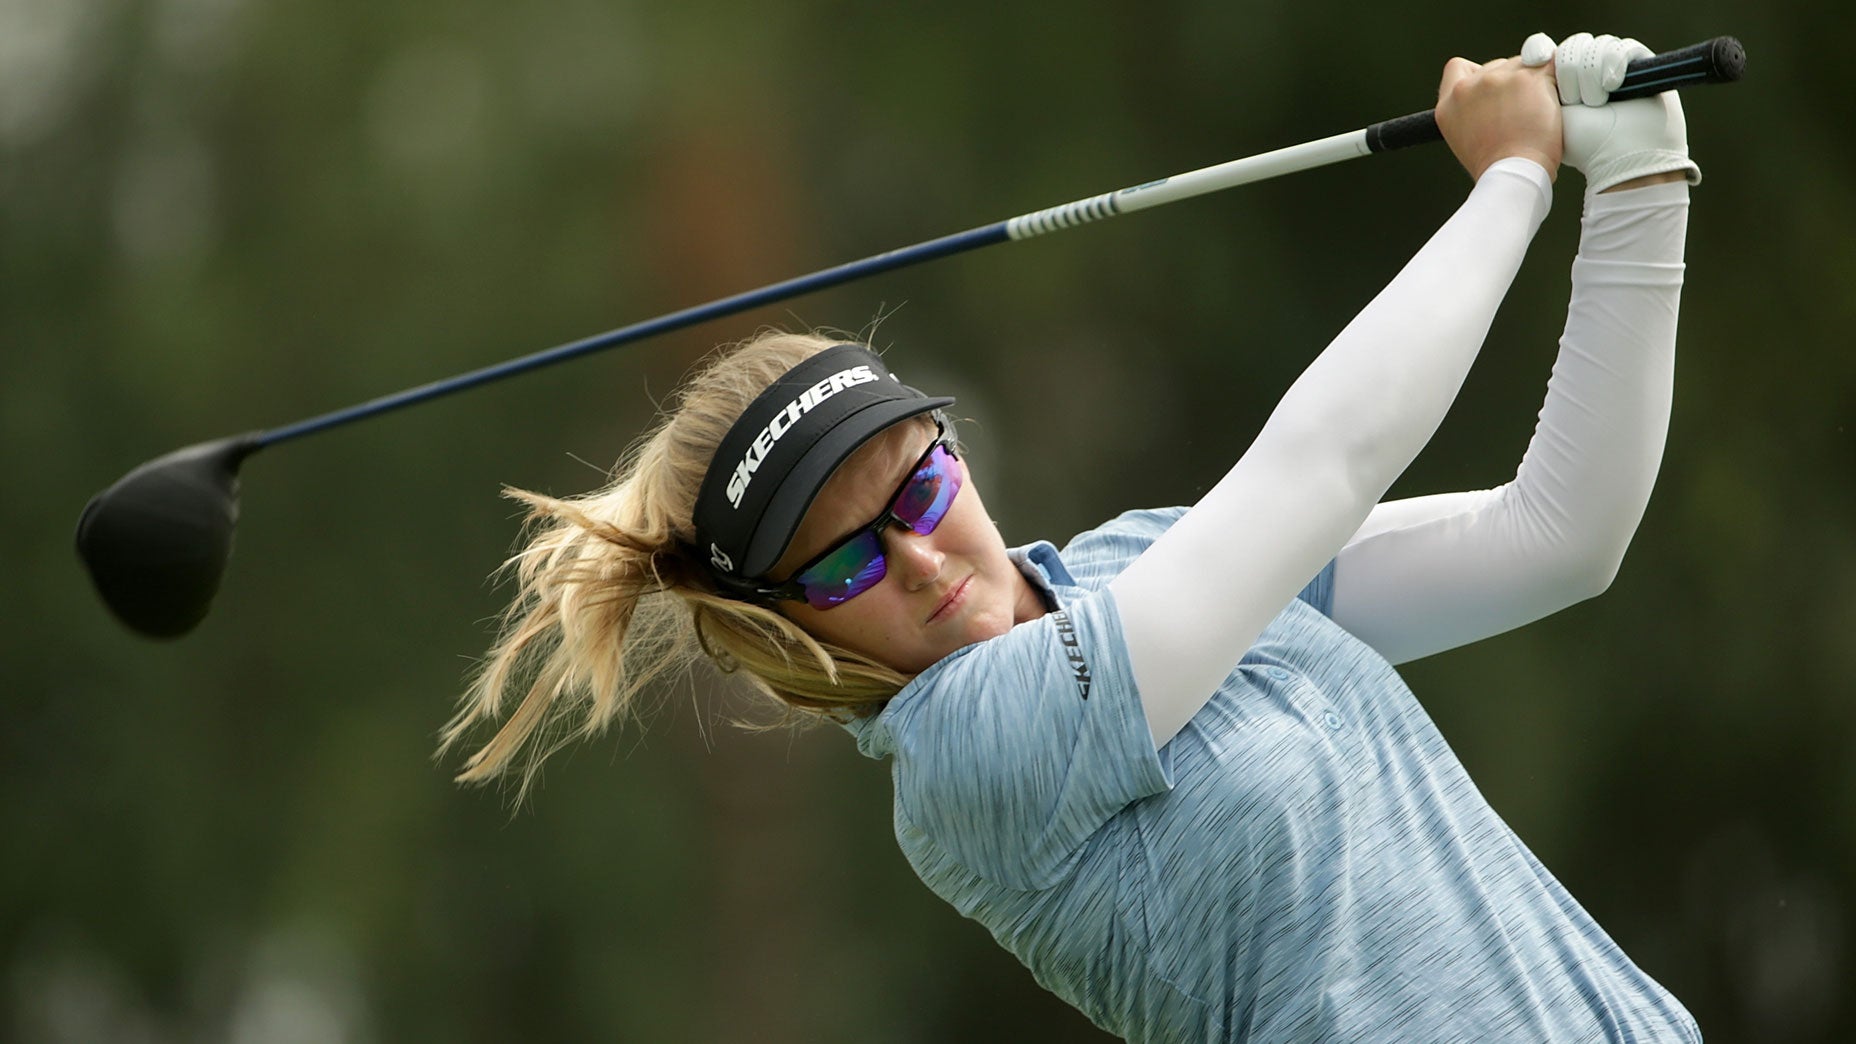 Brooke henderson pictures